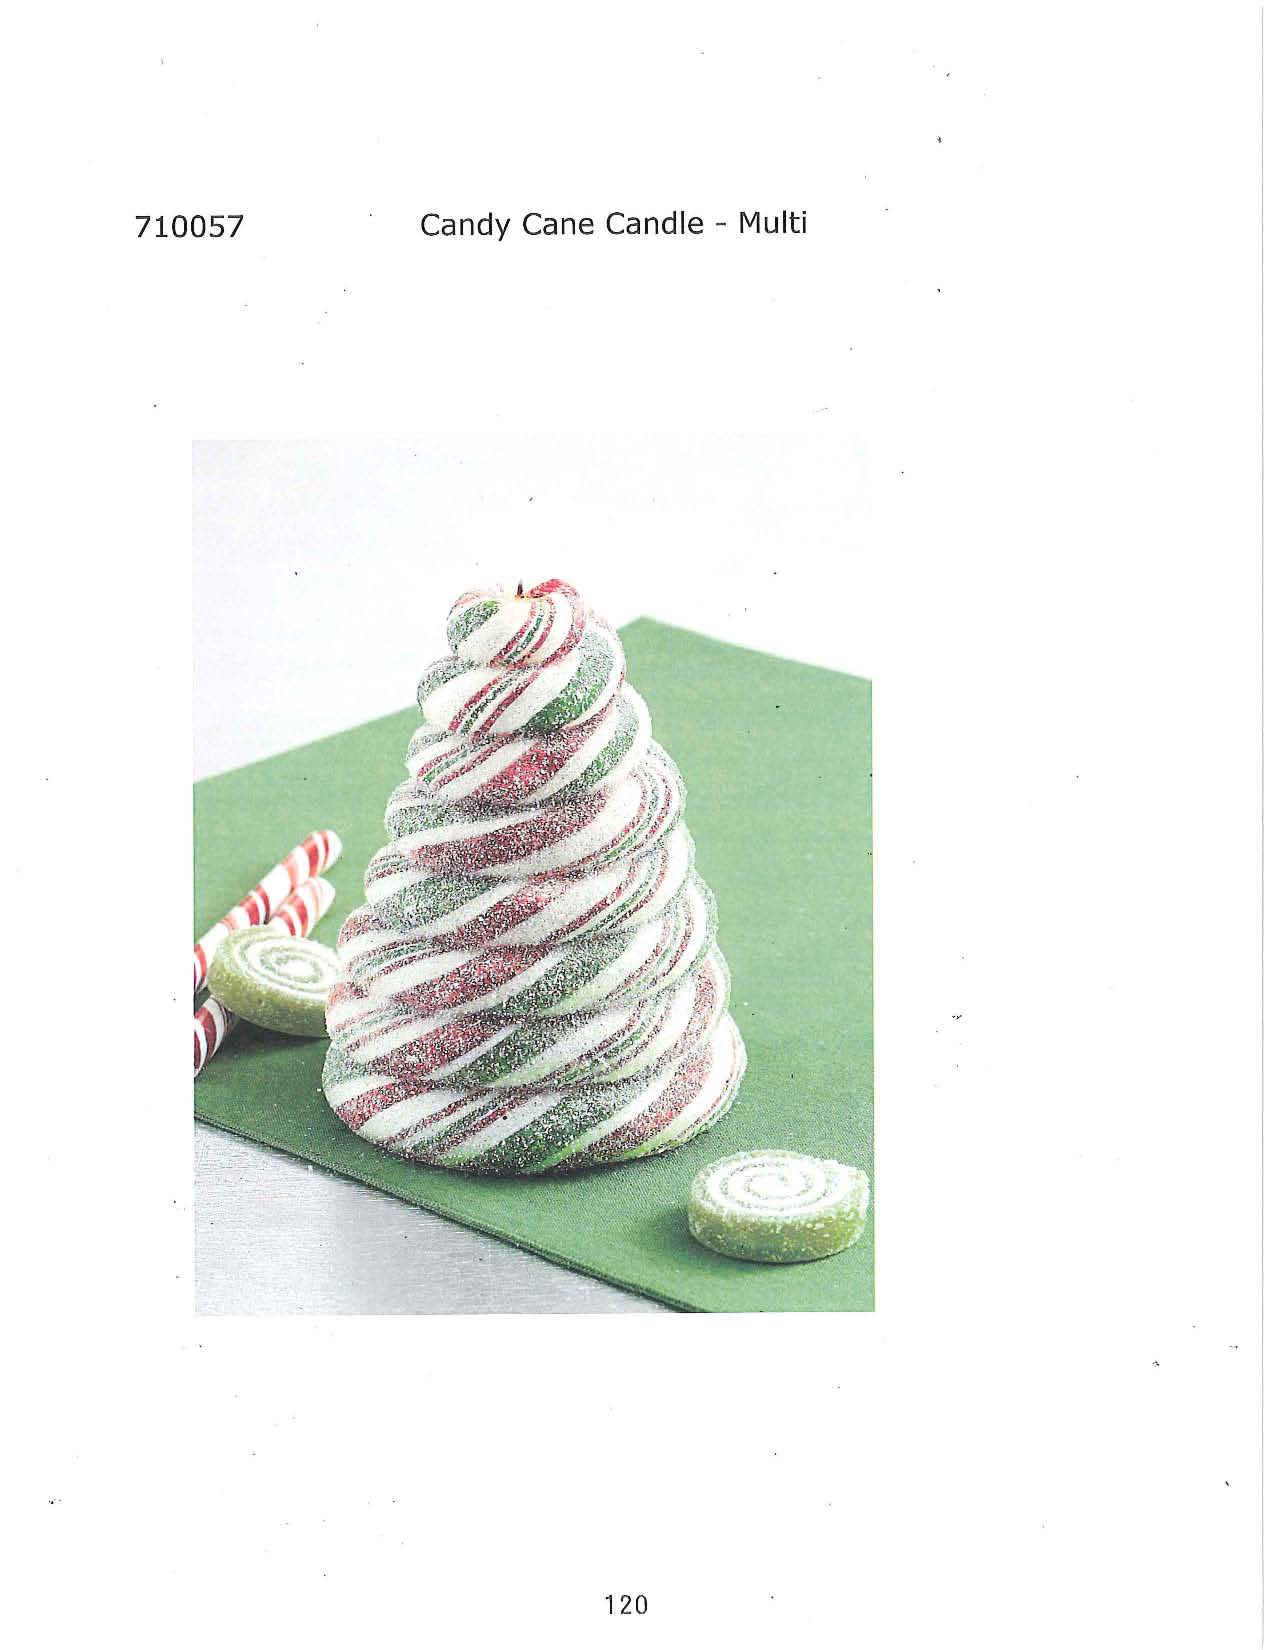 Candy Cane Candle - Multi